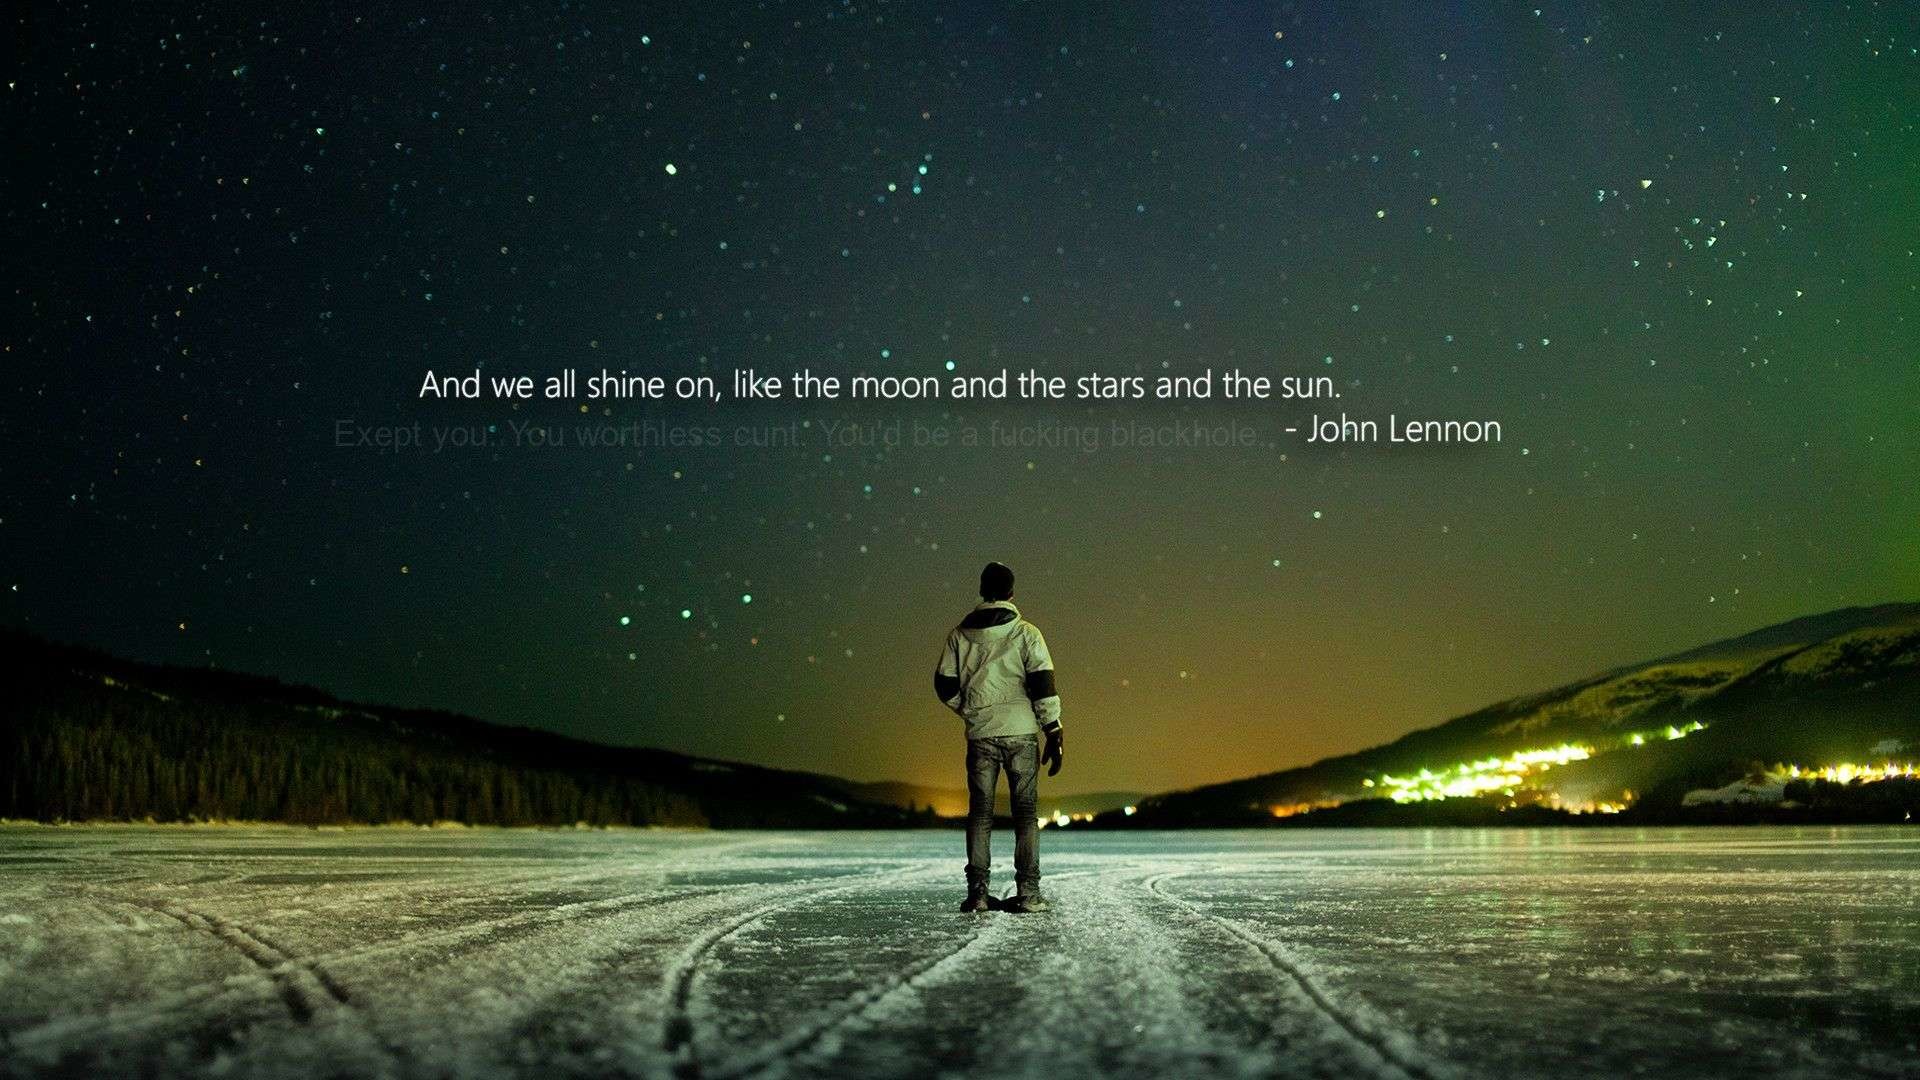 1920x1080 inspirational space wallpaper id: 91085 / Source